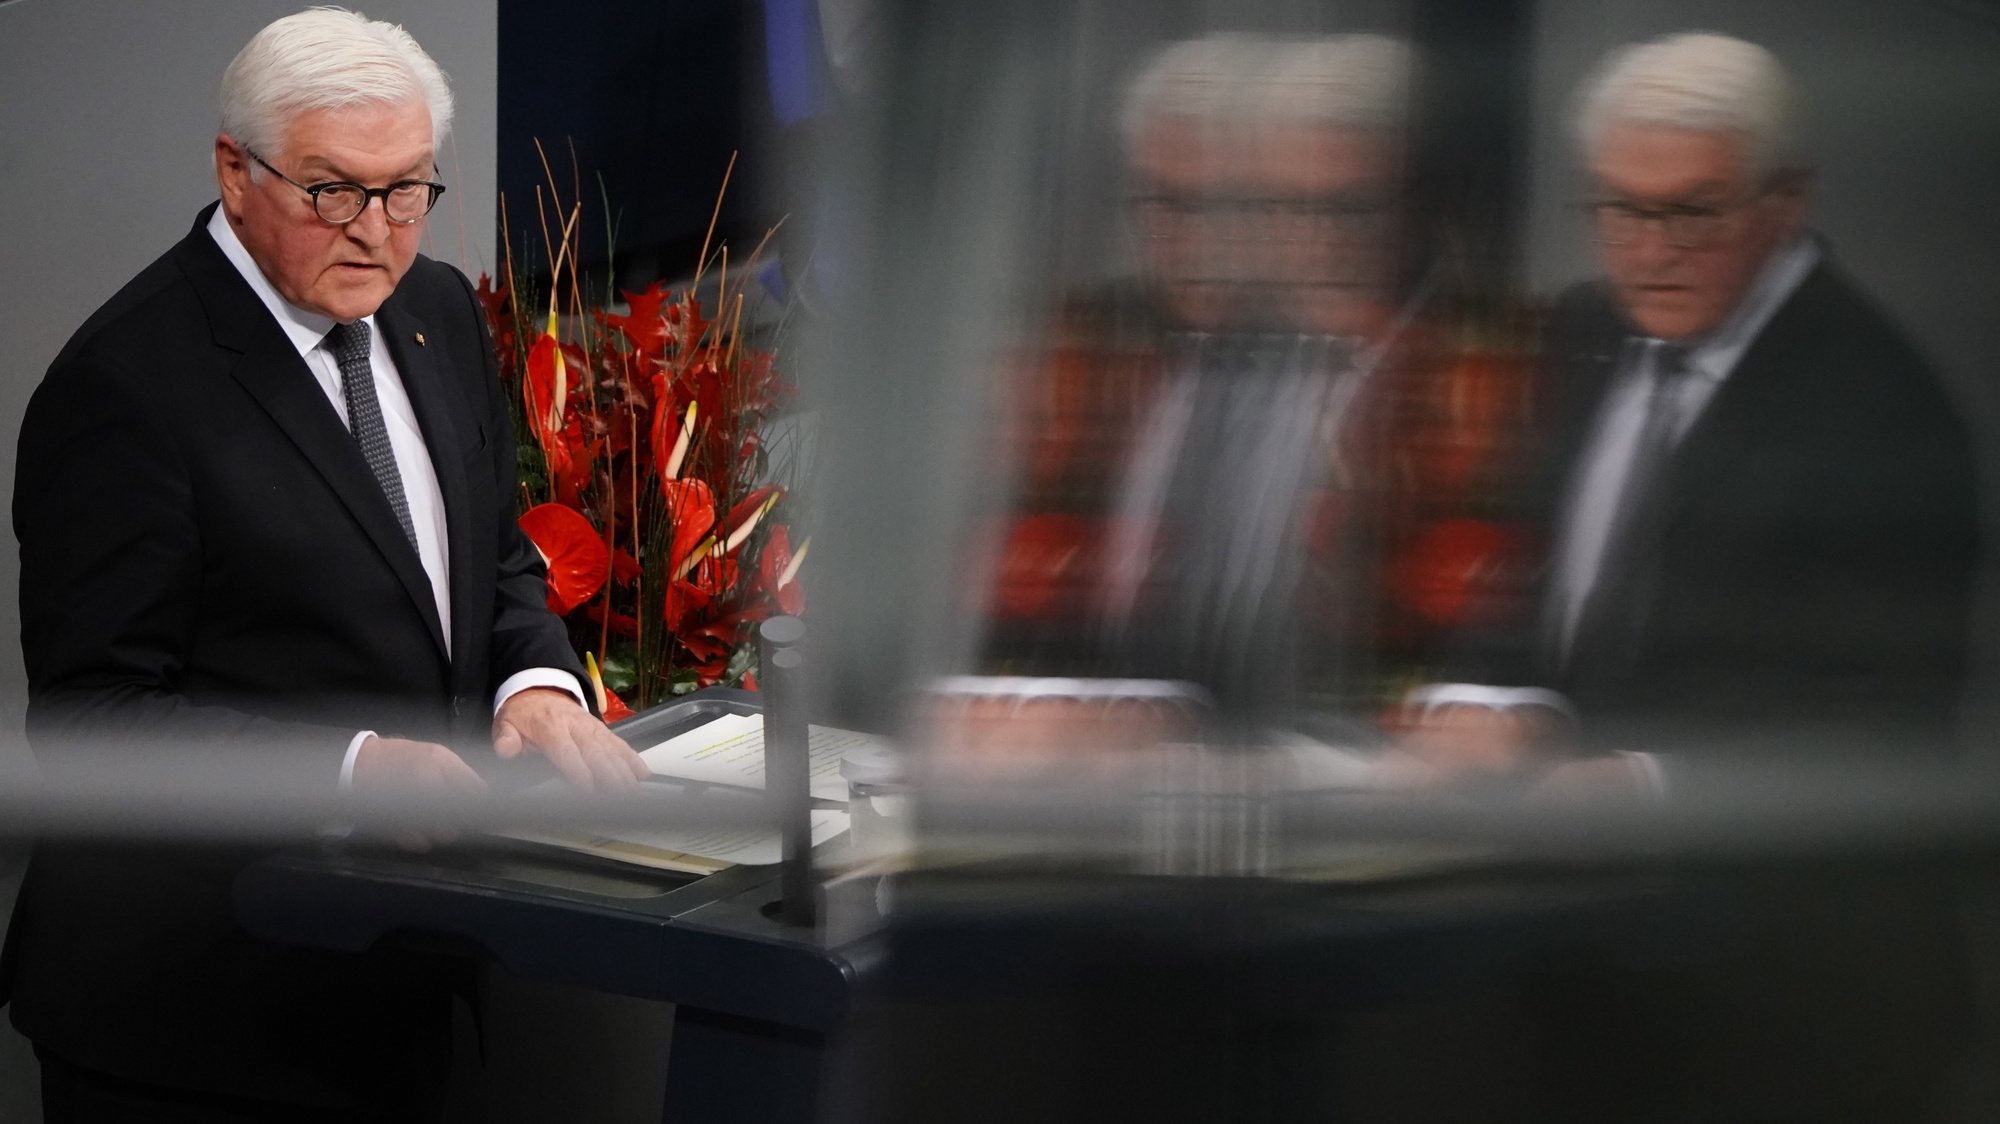 epa09581594 German President Frank-Walter Steinmeier delivers a speech during a memorial ceremony at the German parliament Bundestag to commemorate the national day of mourning for the victims of war and dictatorship in Berlin, Germany, 14 November 2021. Germany commemorates once a year in November during a National Day of Mourning, victims of war and fascism.  EPA/CLEMENS BILAN